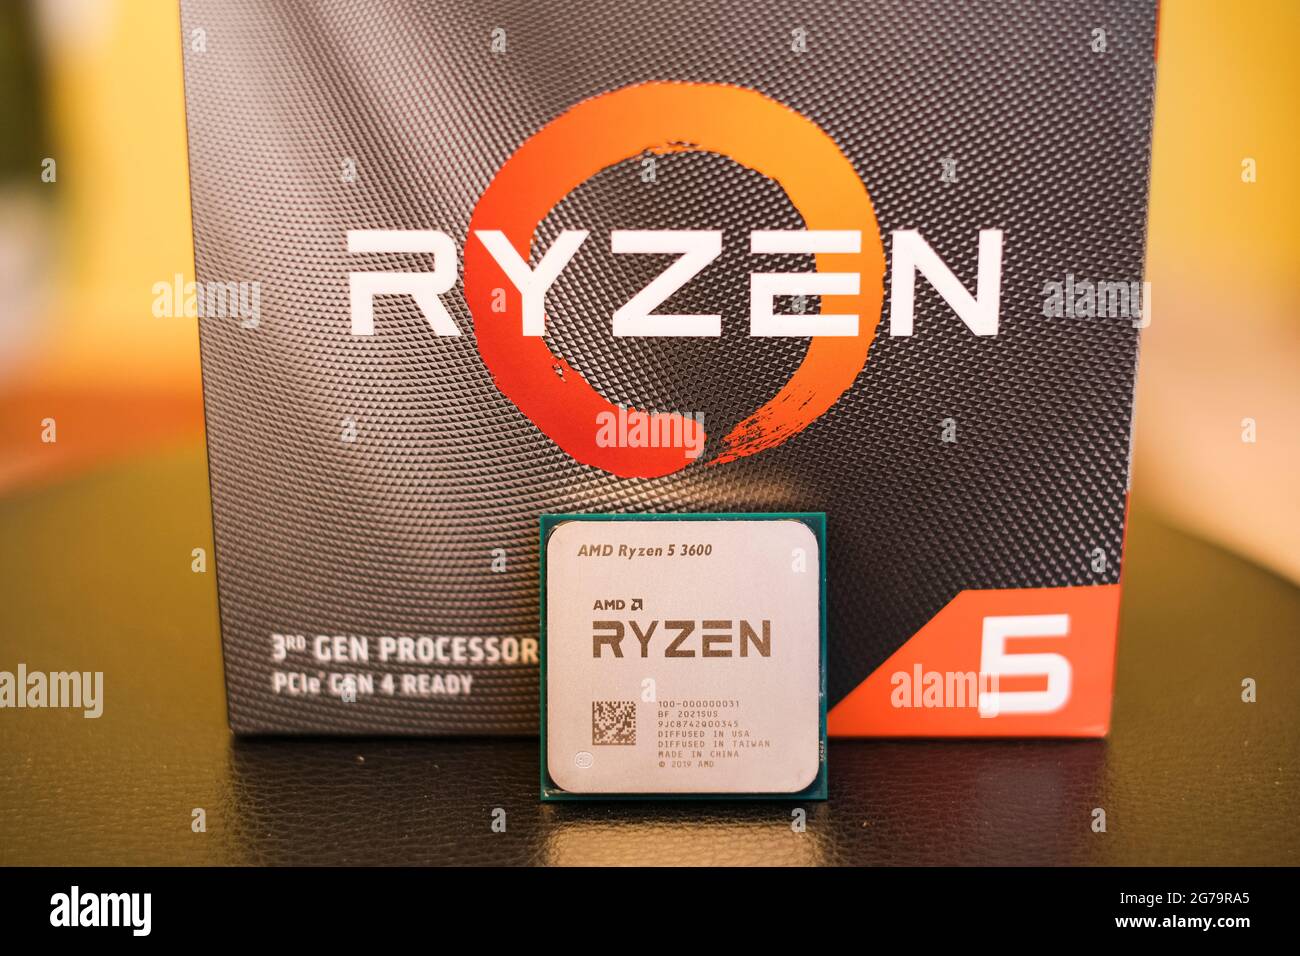 Amd ryzen 3600 desktop pc cpu with selling box package,computer components  chip Stock Photo - Alamy